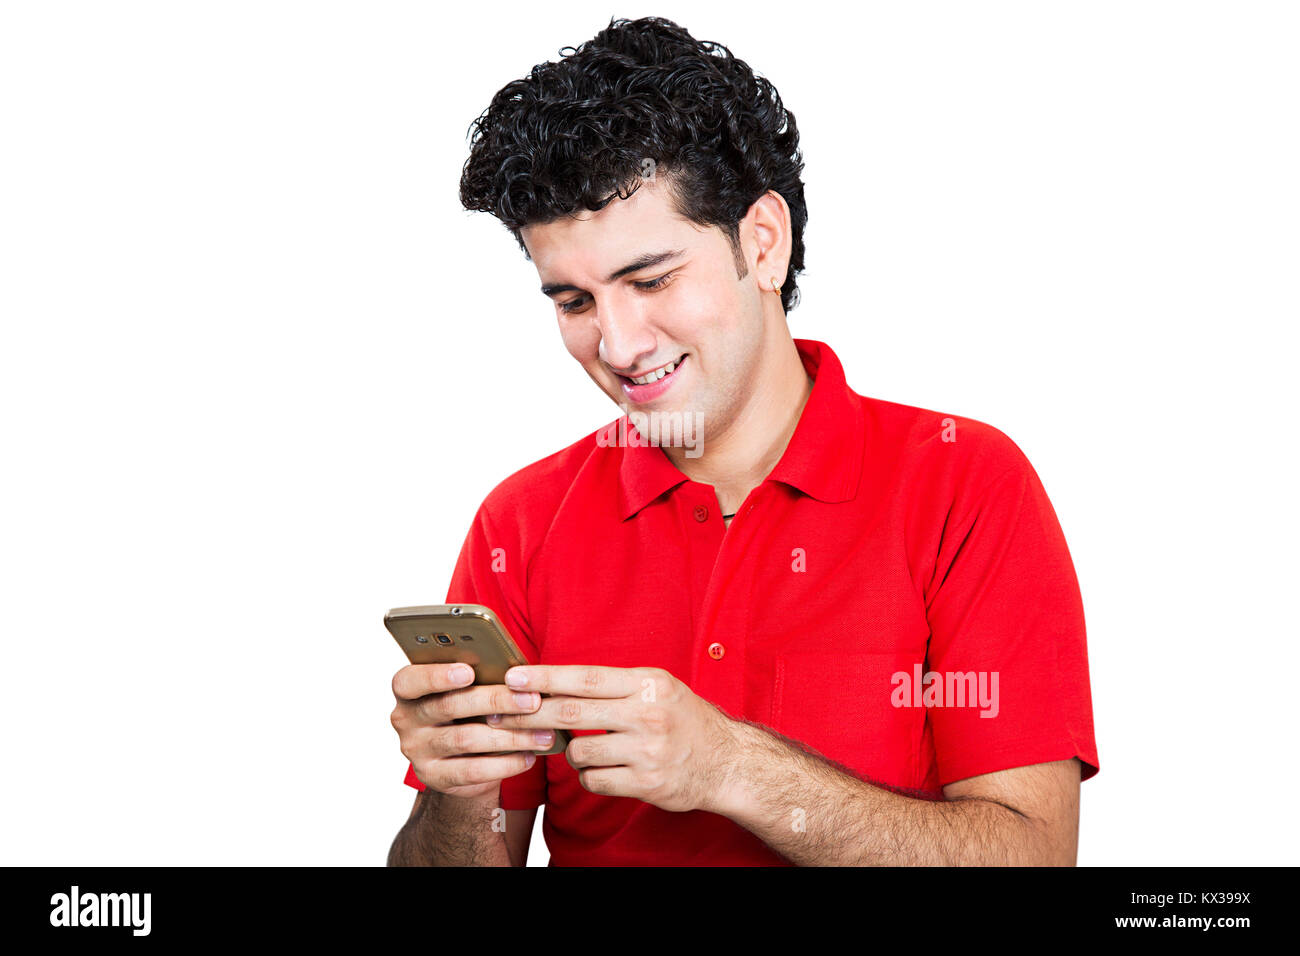 1 Indian Young Man Reading Messaging On Mobile Phone Smiling Stock Photo